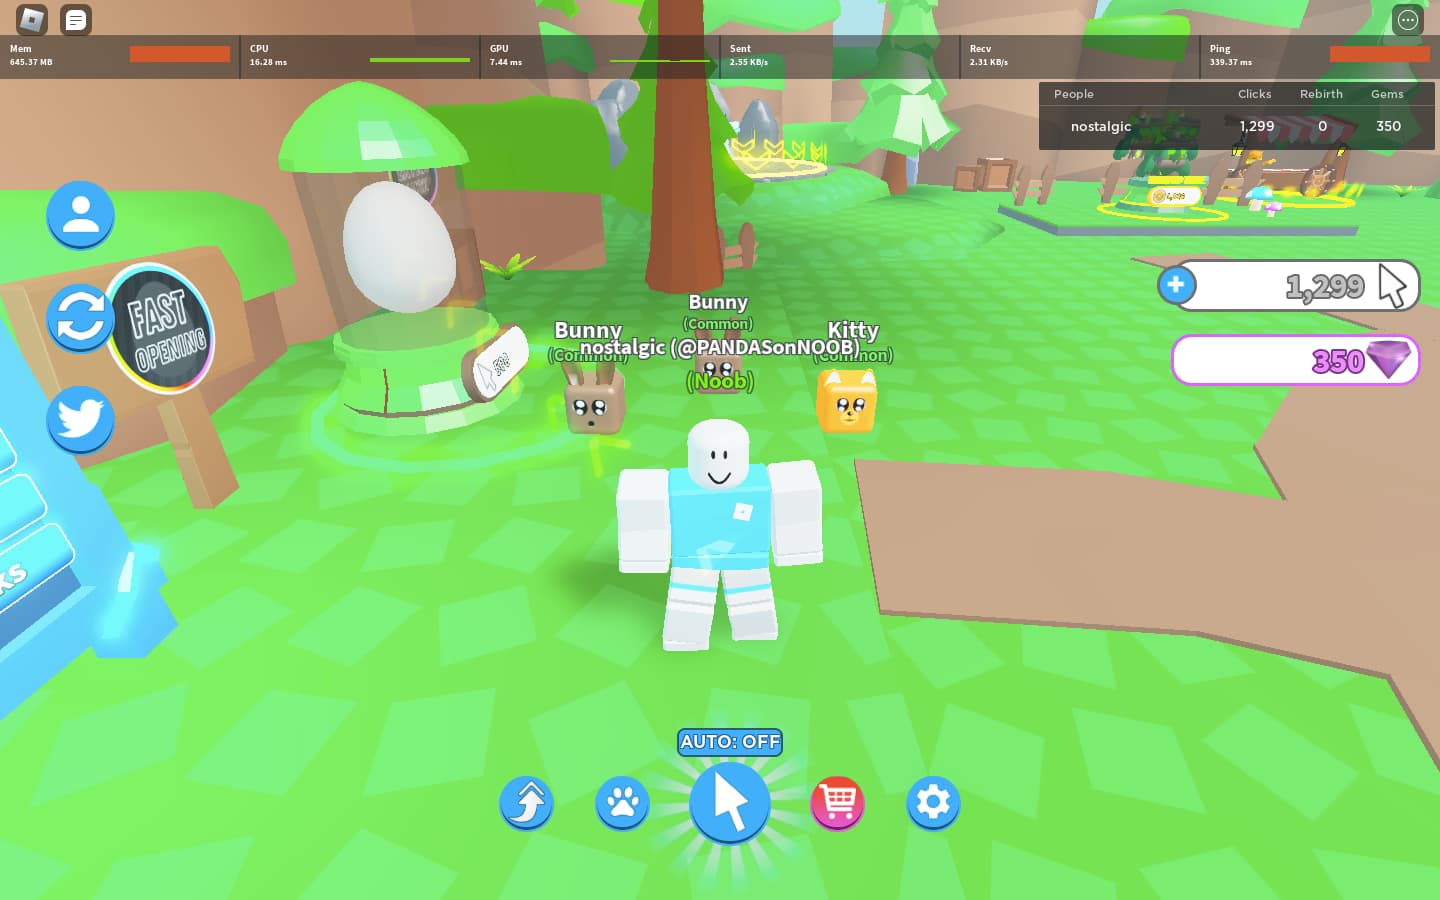 Can you rate my classic roblox game? - Creations Feedback - Developer Forum